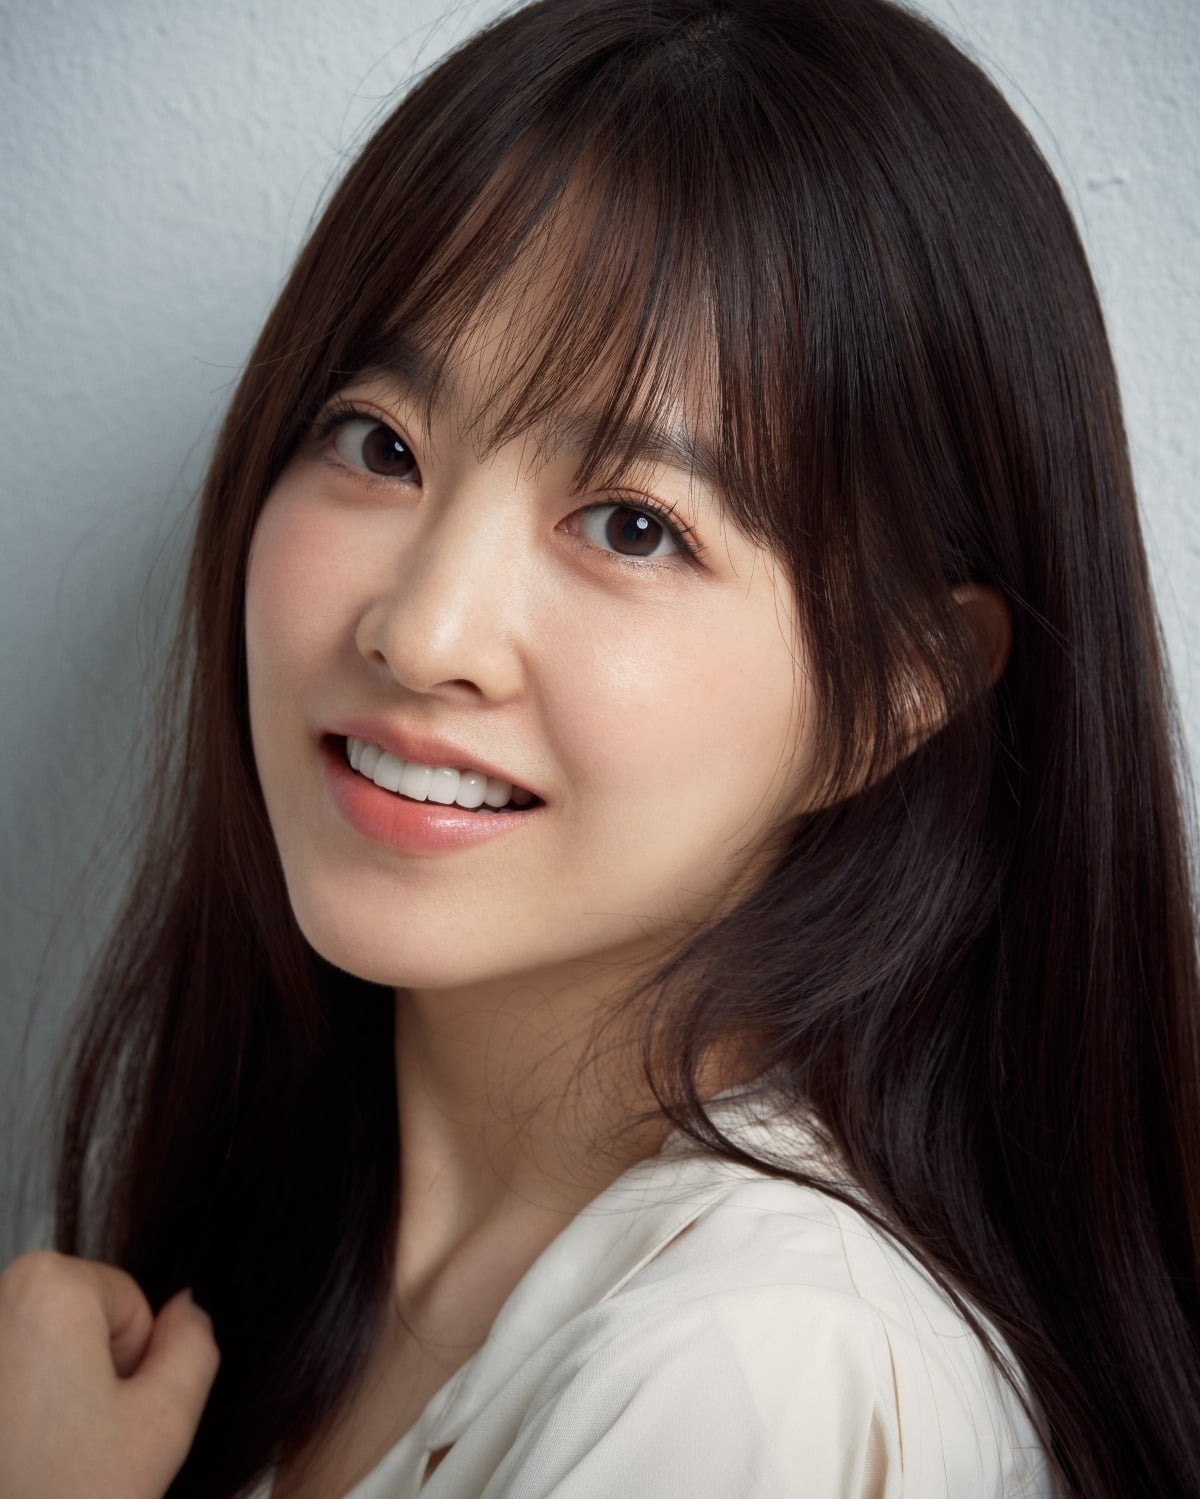 Actor Park Bo-young "I want to continue to challenge the genre like the movie 'Concrete Utopia'"